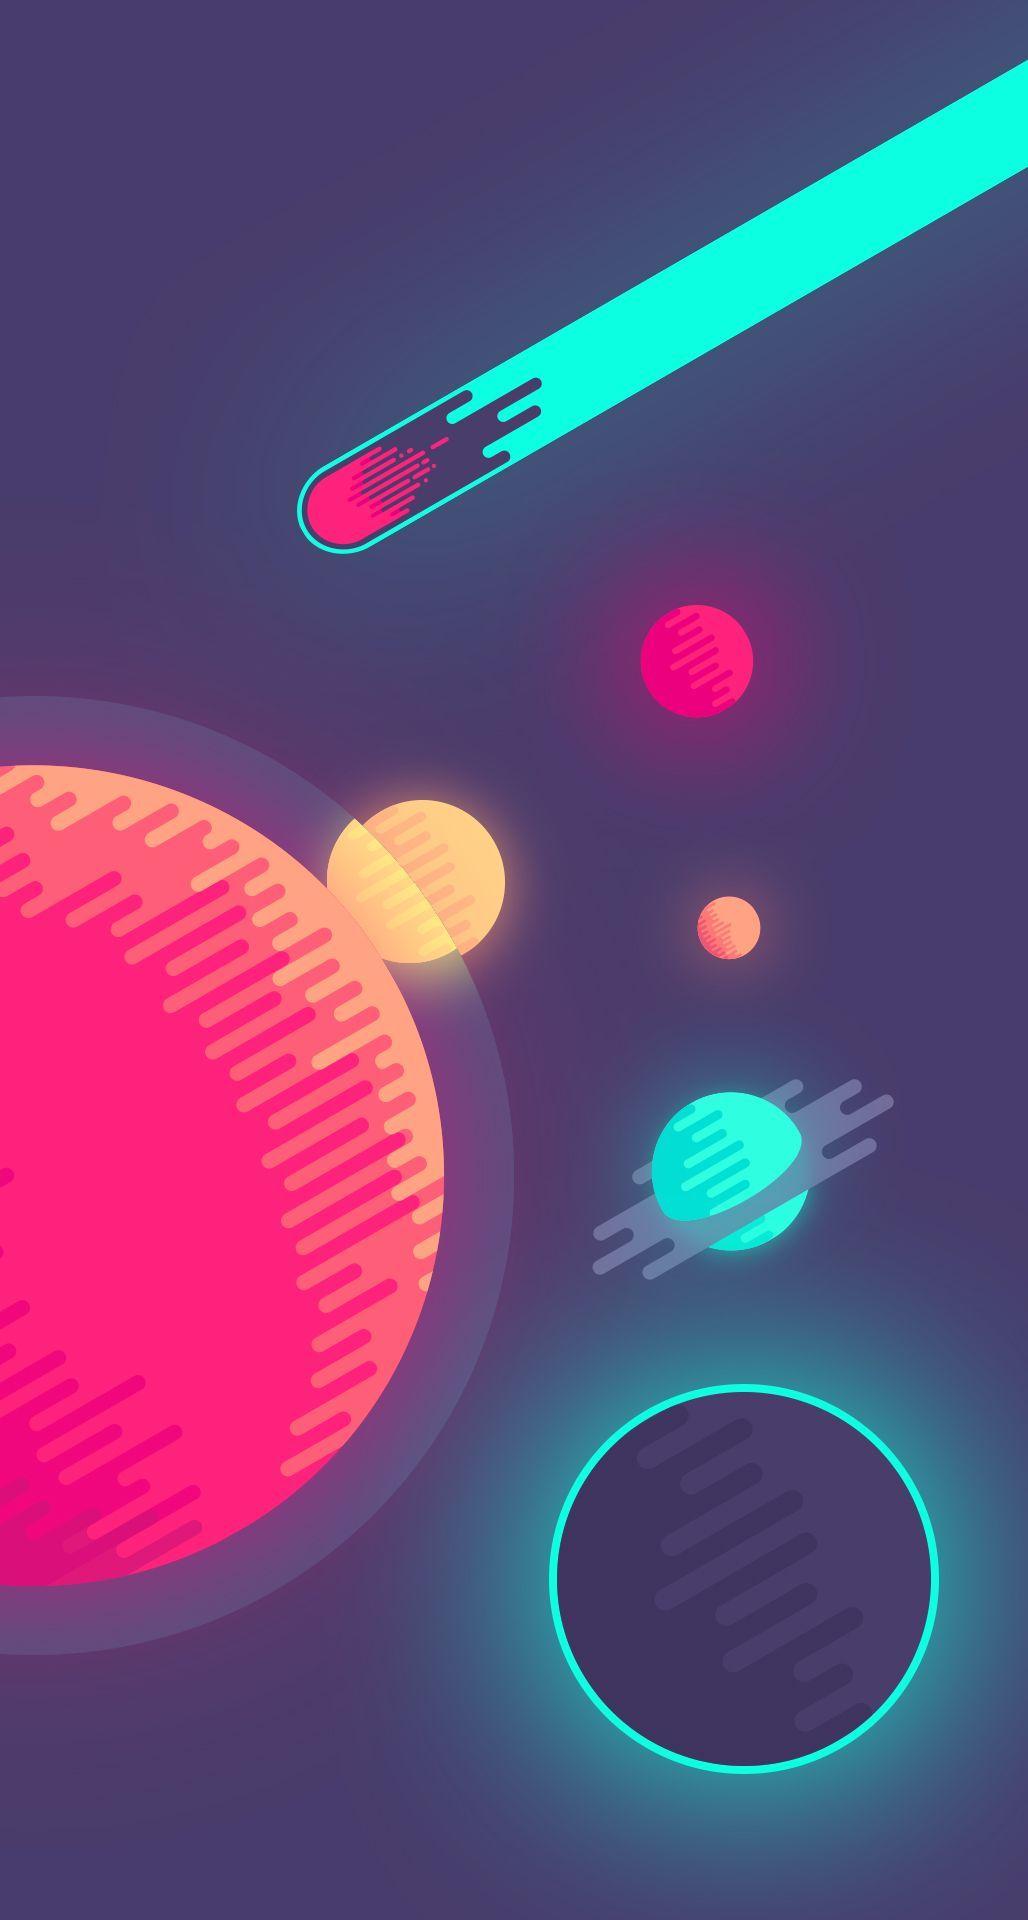 Sharing my space wallpaper. Smartphone, Spaces